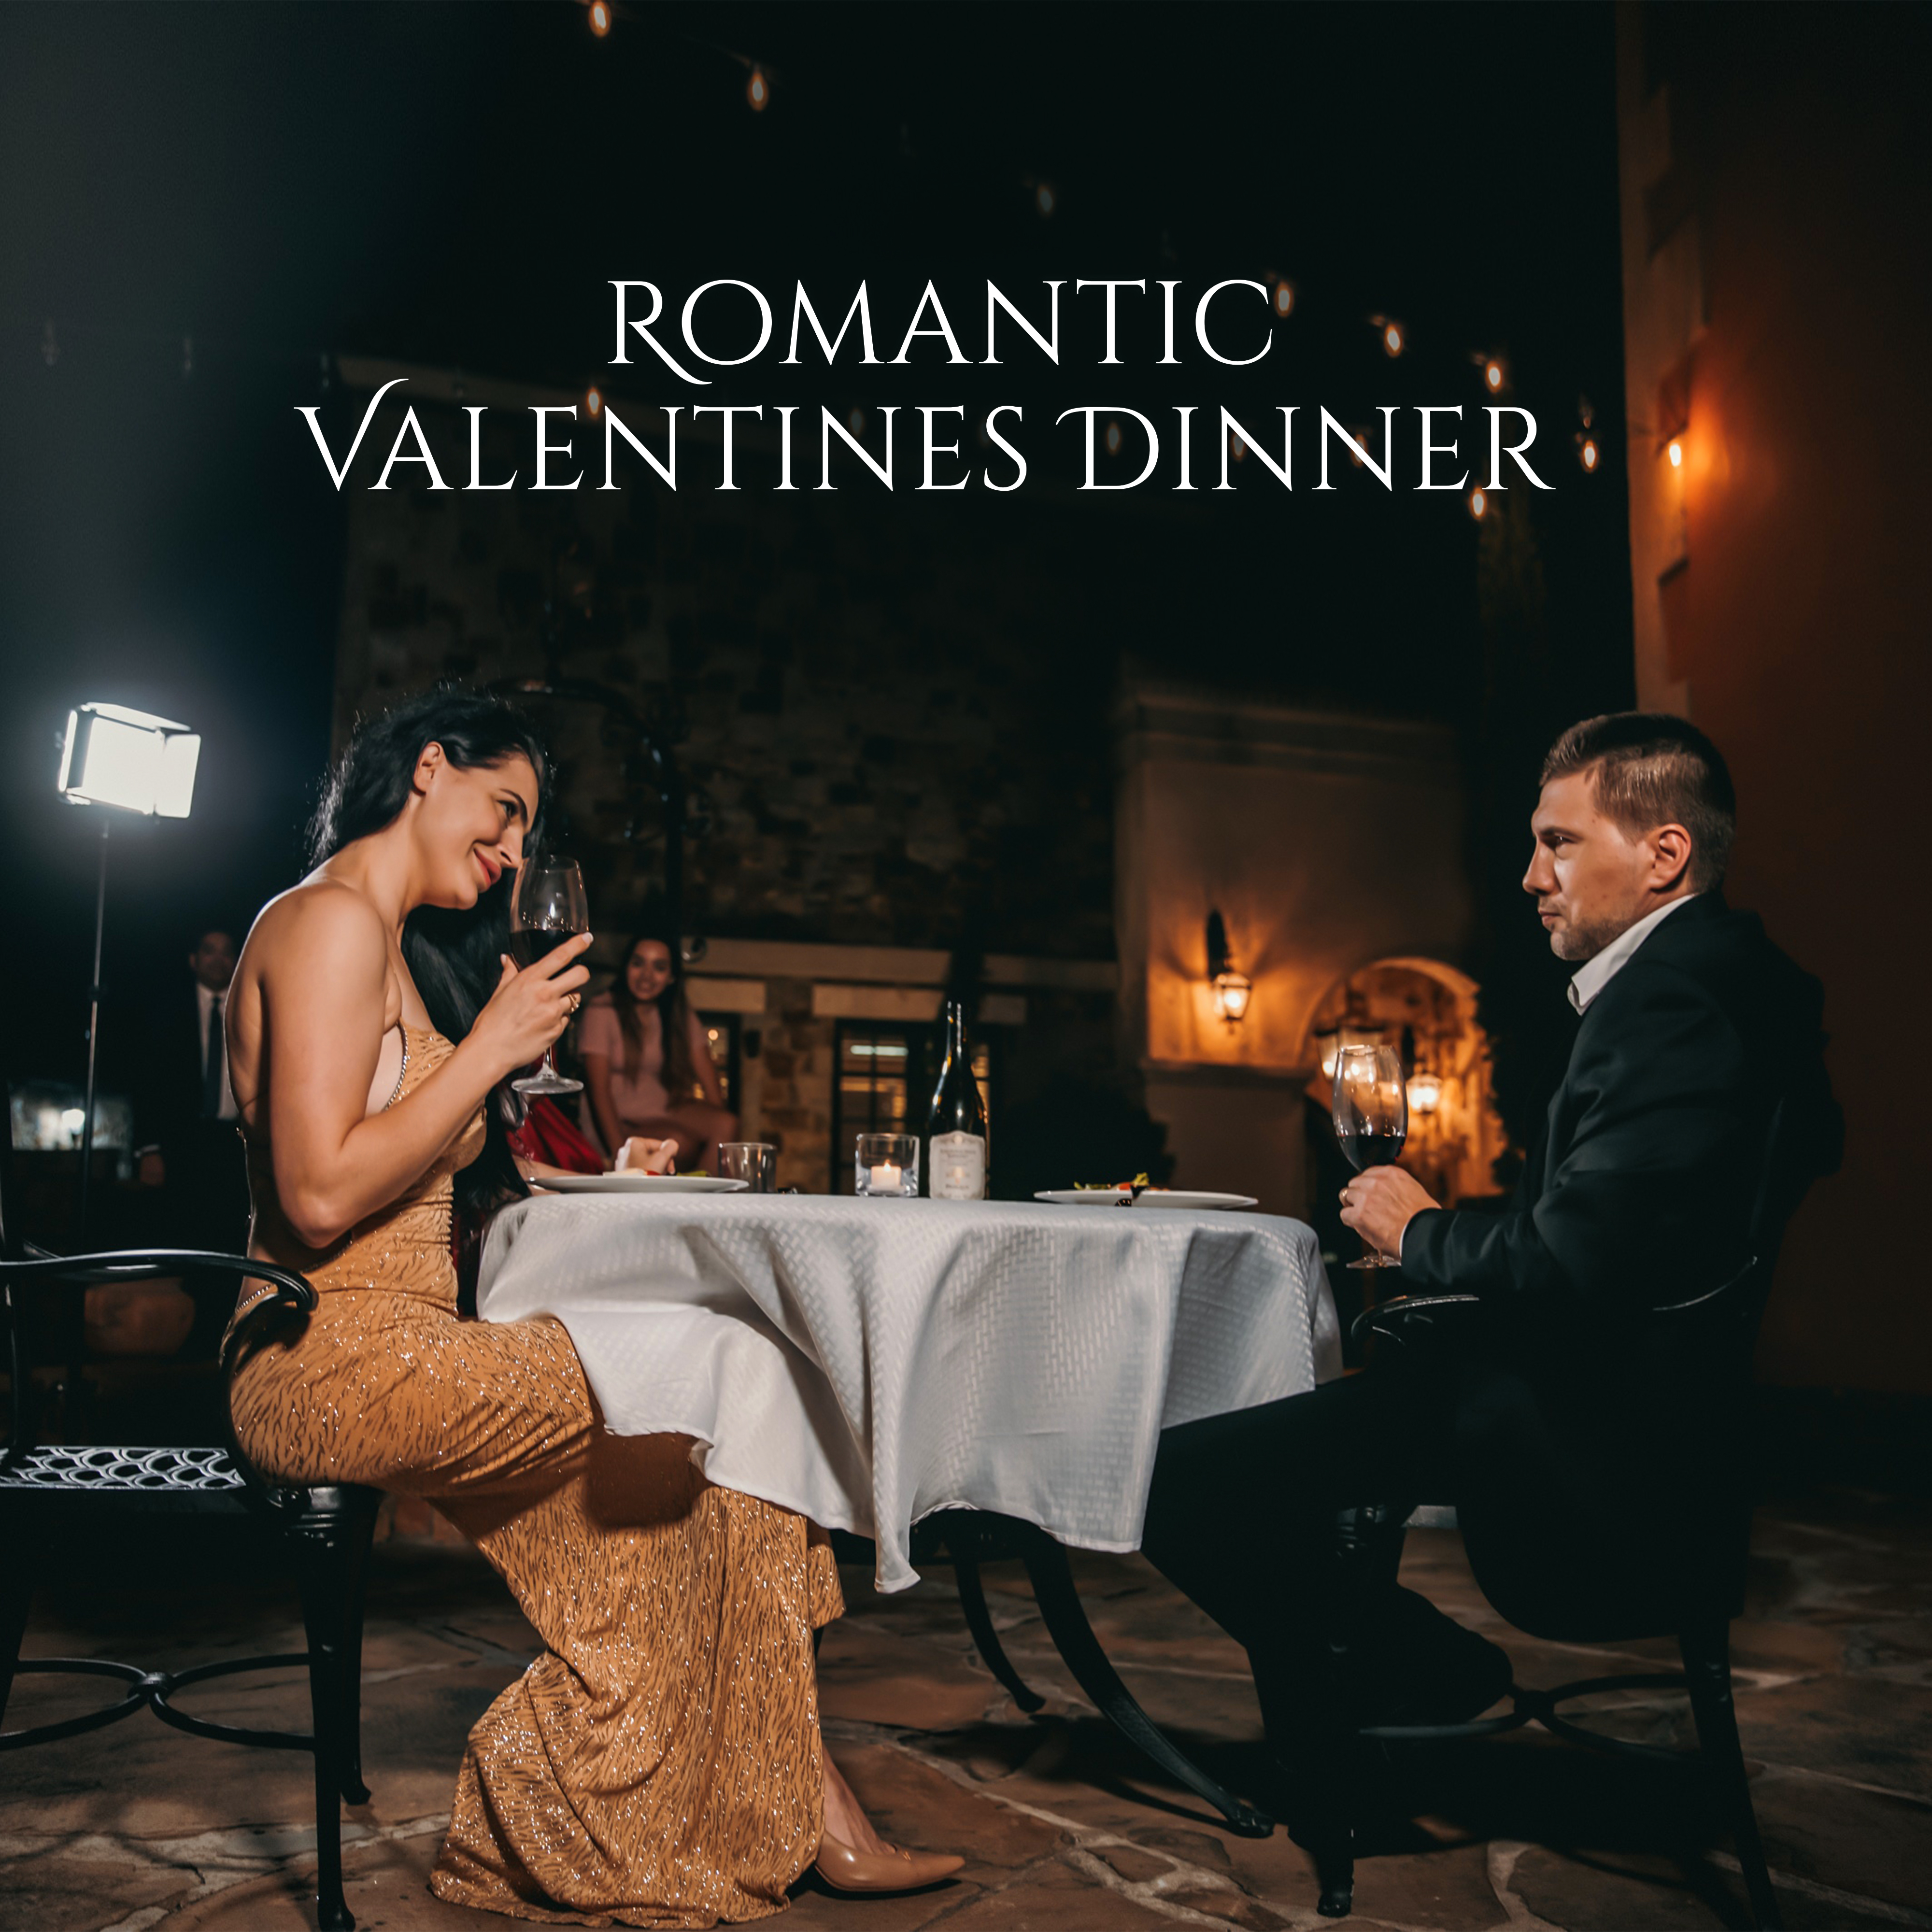 Romantic Valentines Dinner – Sensual Jazz Music, Jazz Coffee, Romantic Songs for Restaurant, Relaxation, Sweet Jazz for Lovers